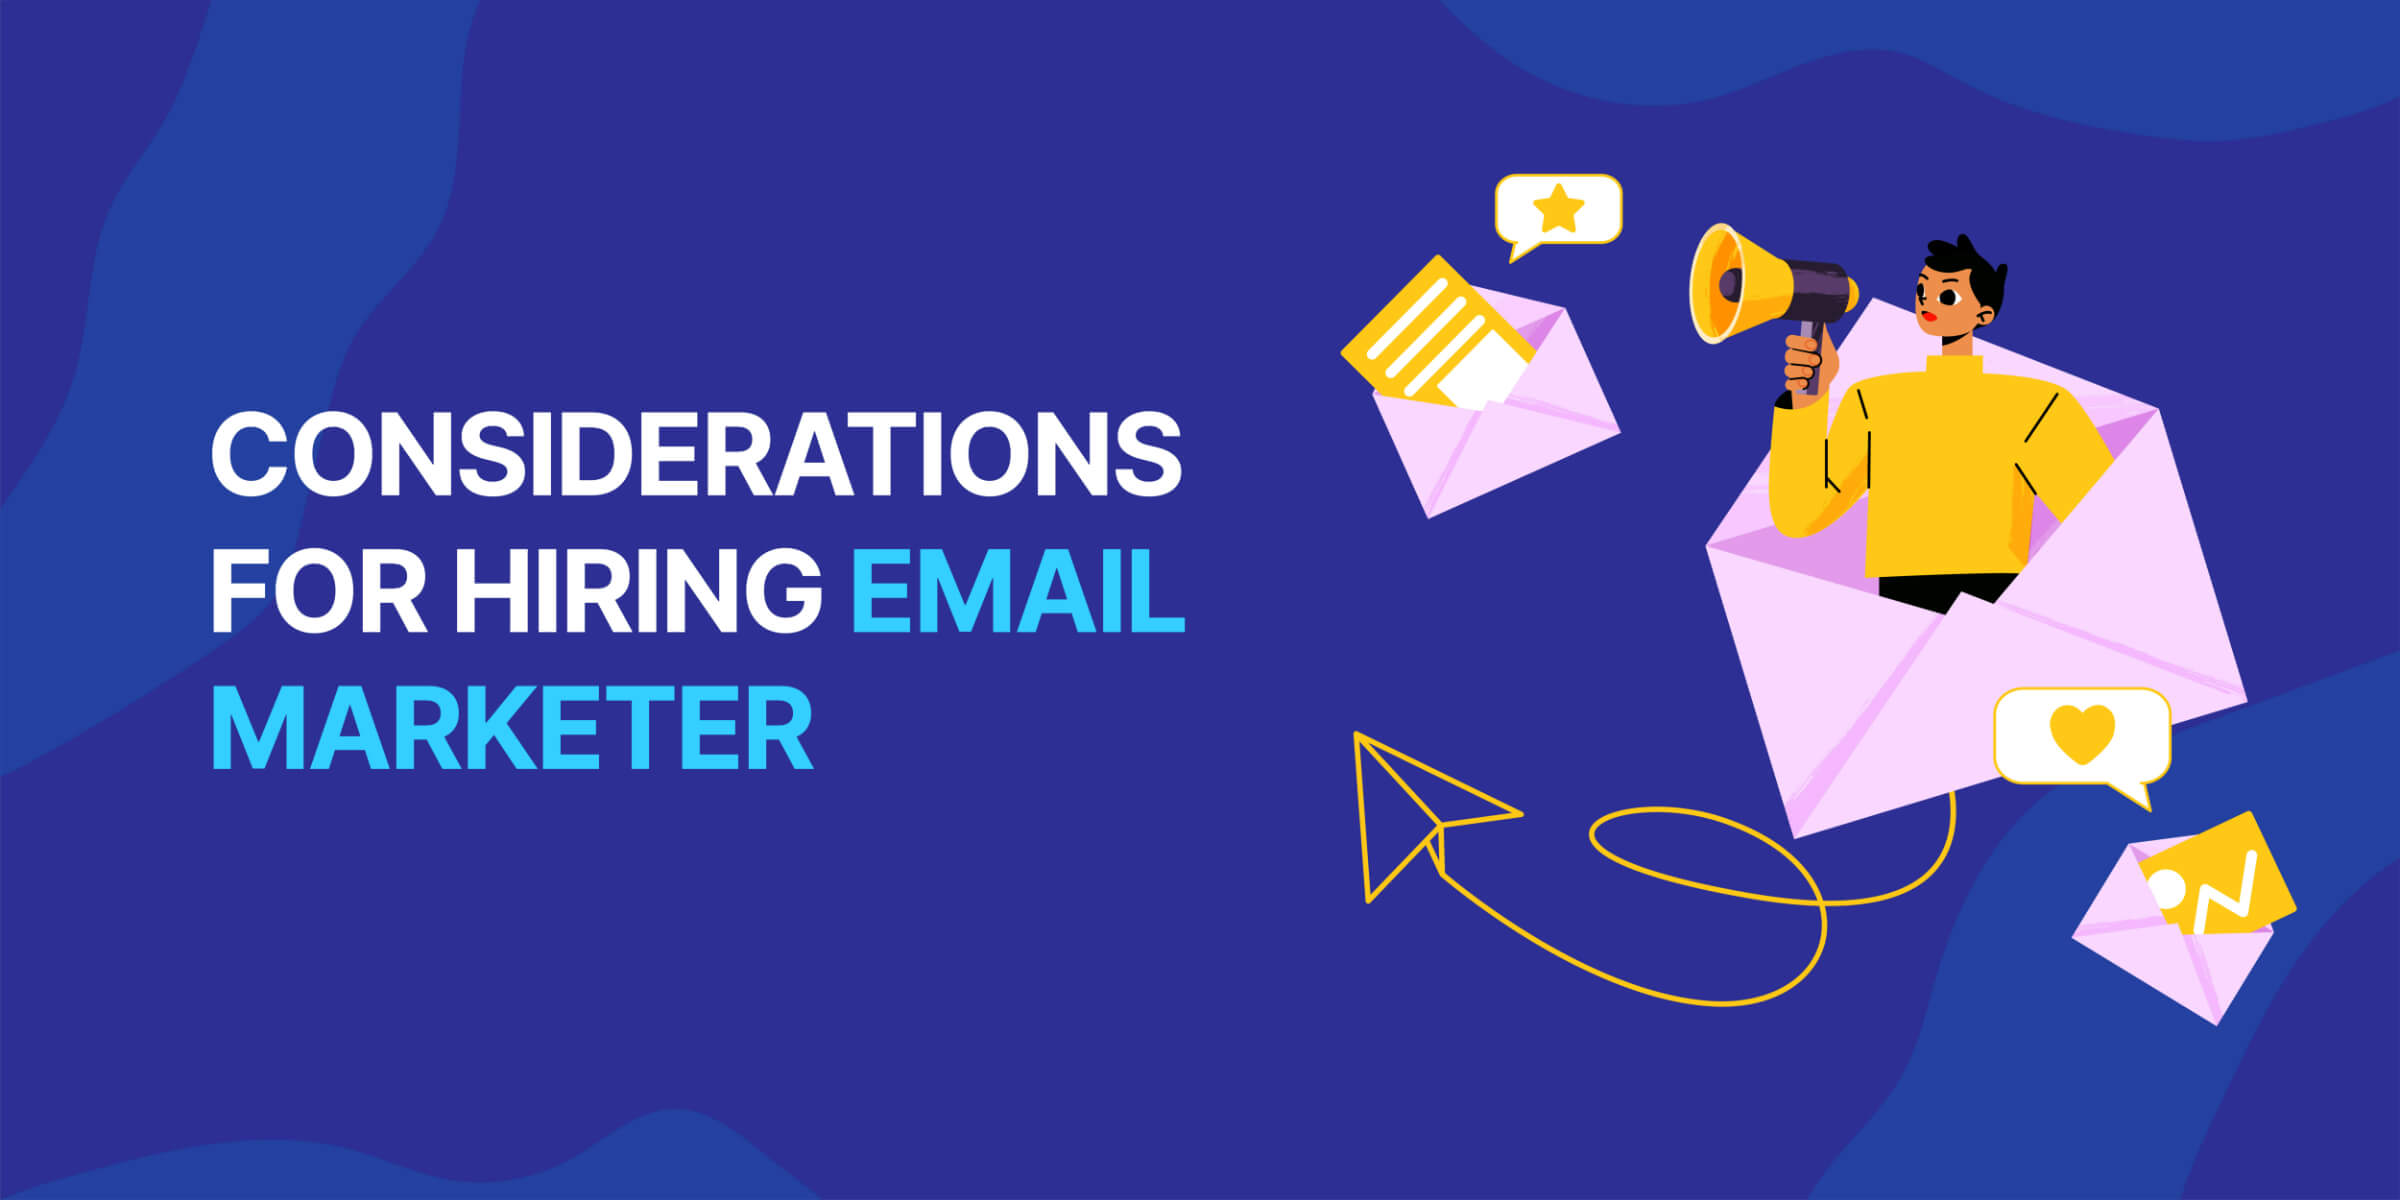 Considerations for Hiring Email Marketer